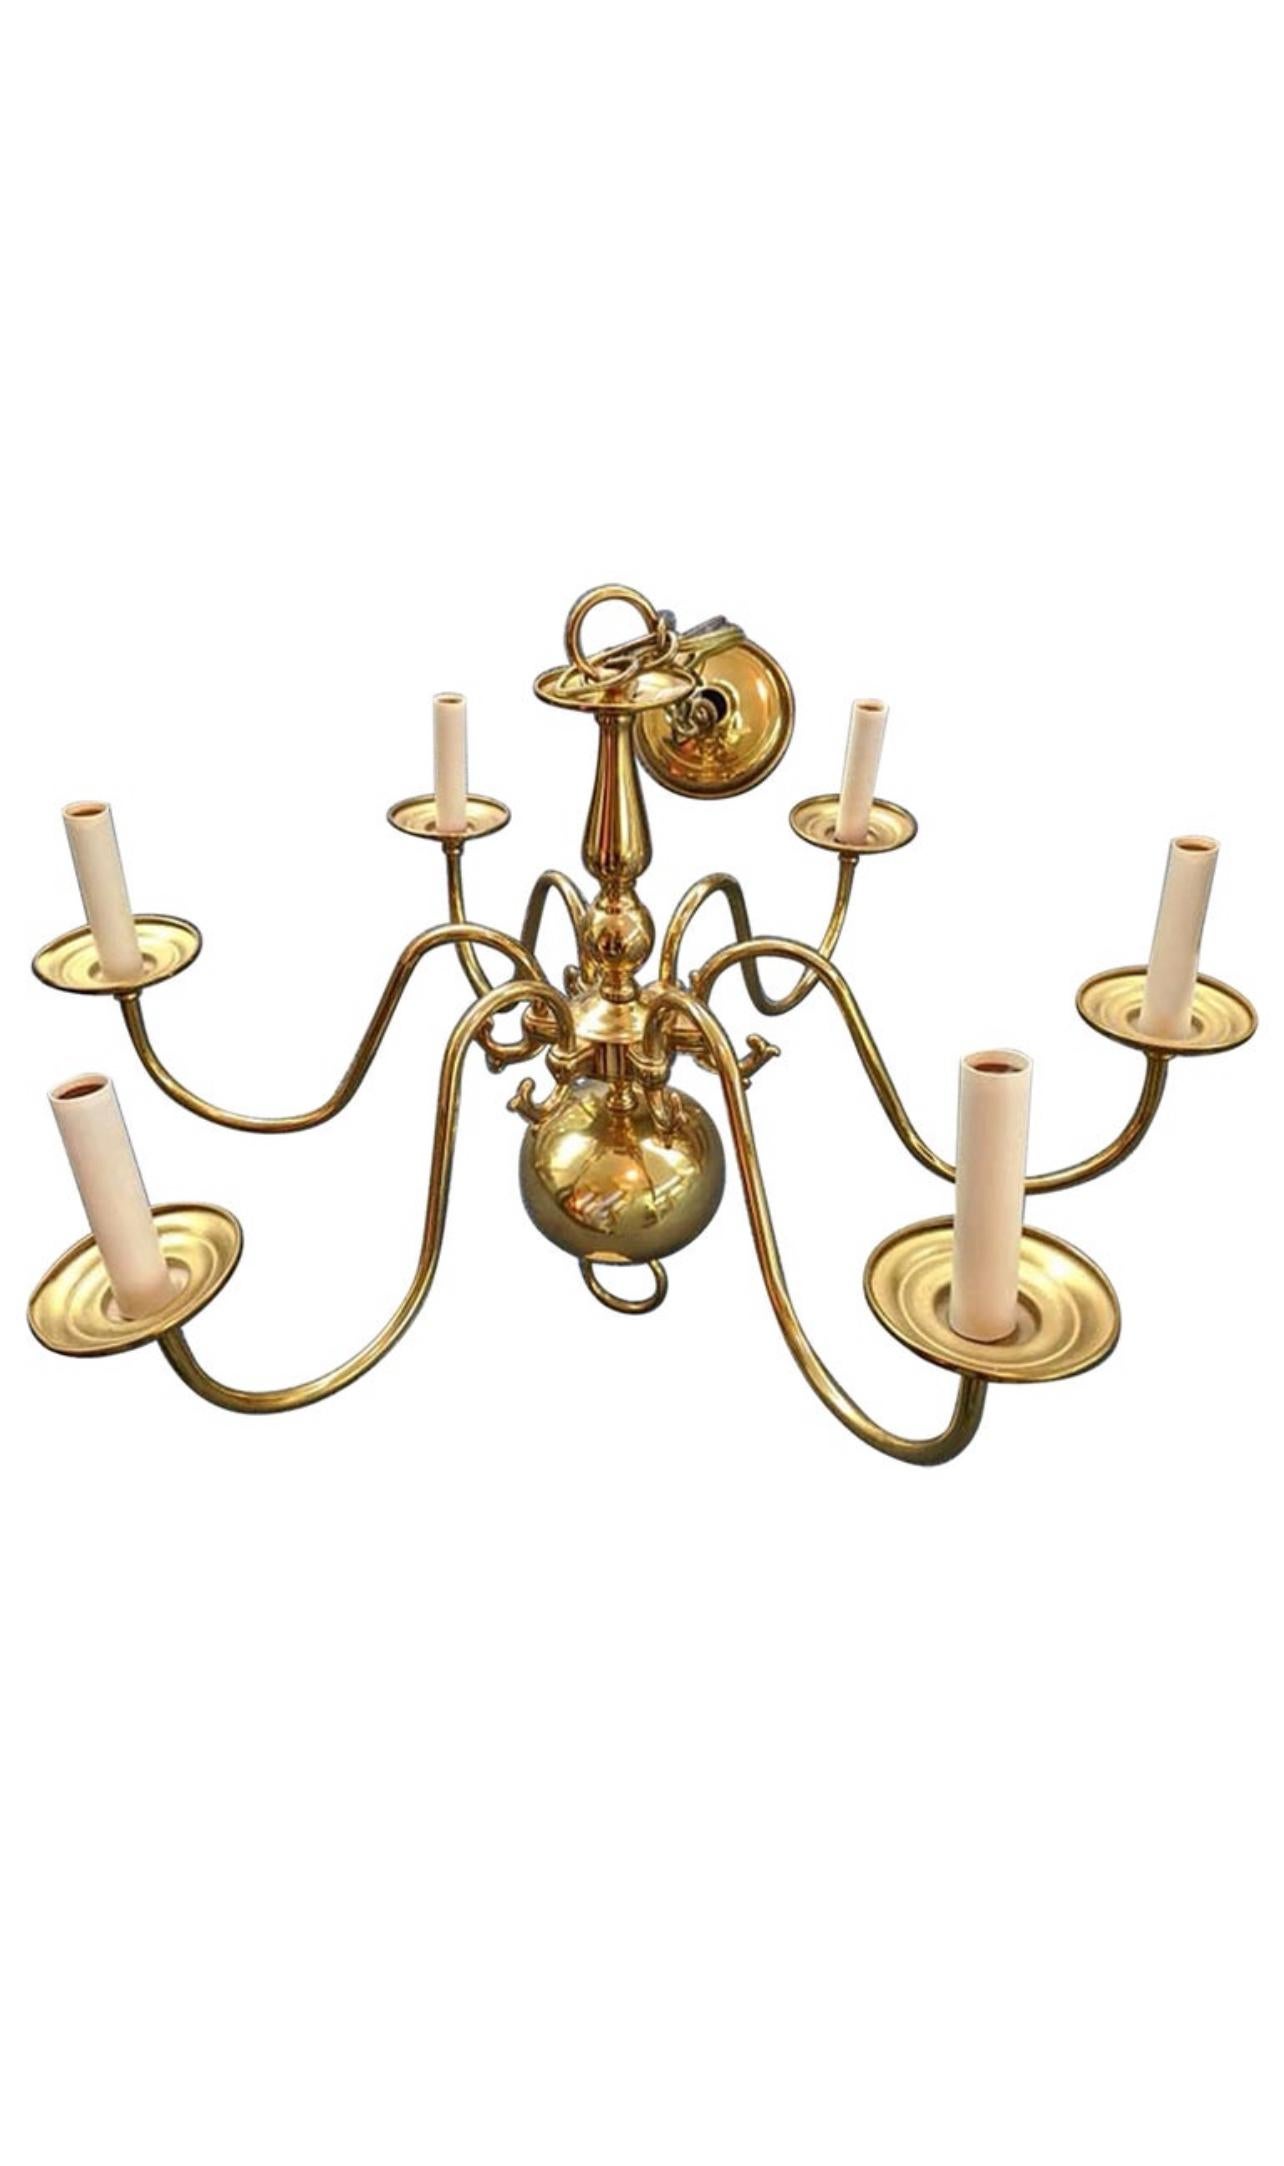 Georgian-style medium
size chandelier with six (6) electrified arms, in polished brass.

Features classic English design elements including urn shape in the post and large globe below, with each curved scroll arm culminating in a thick candle cup